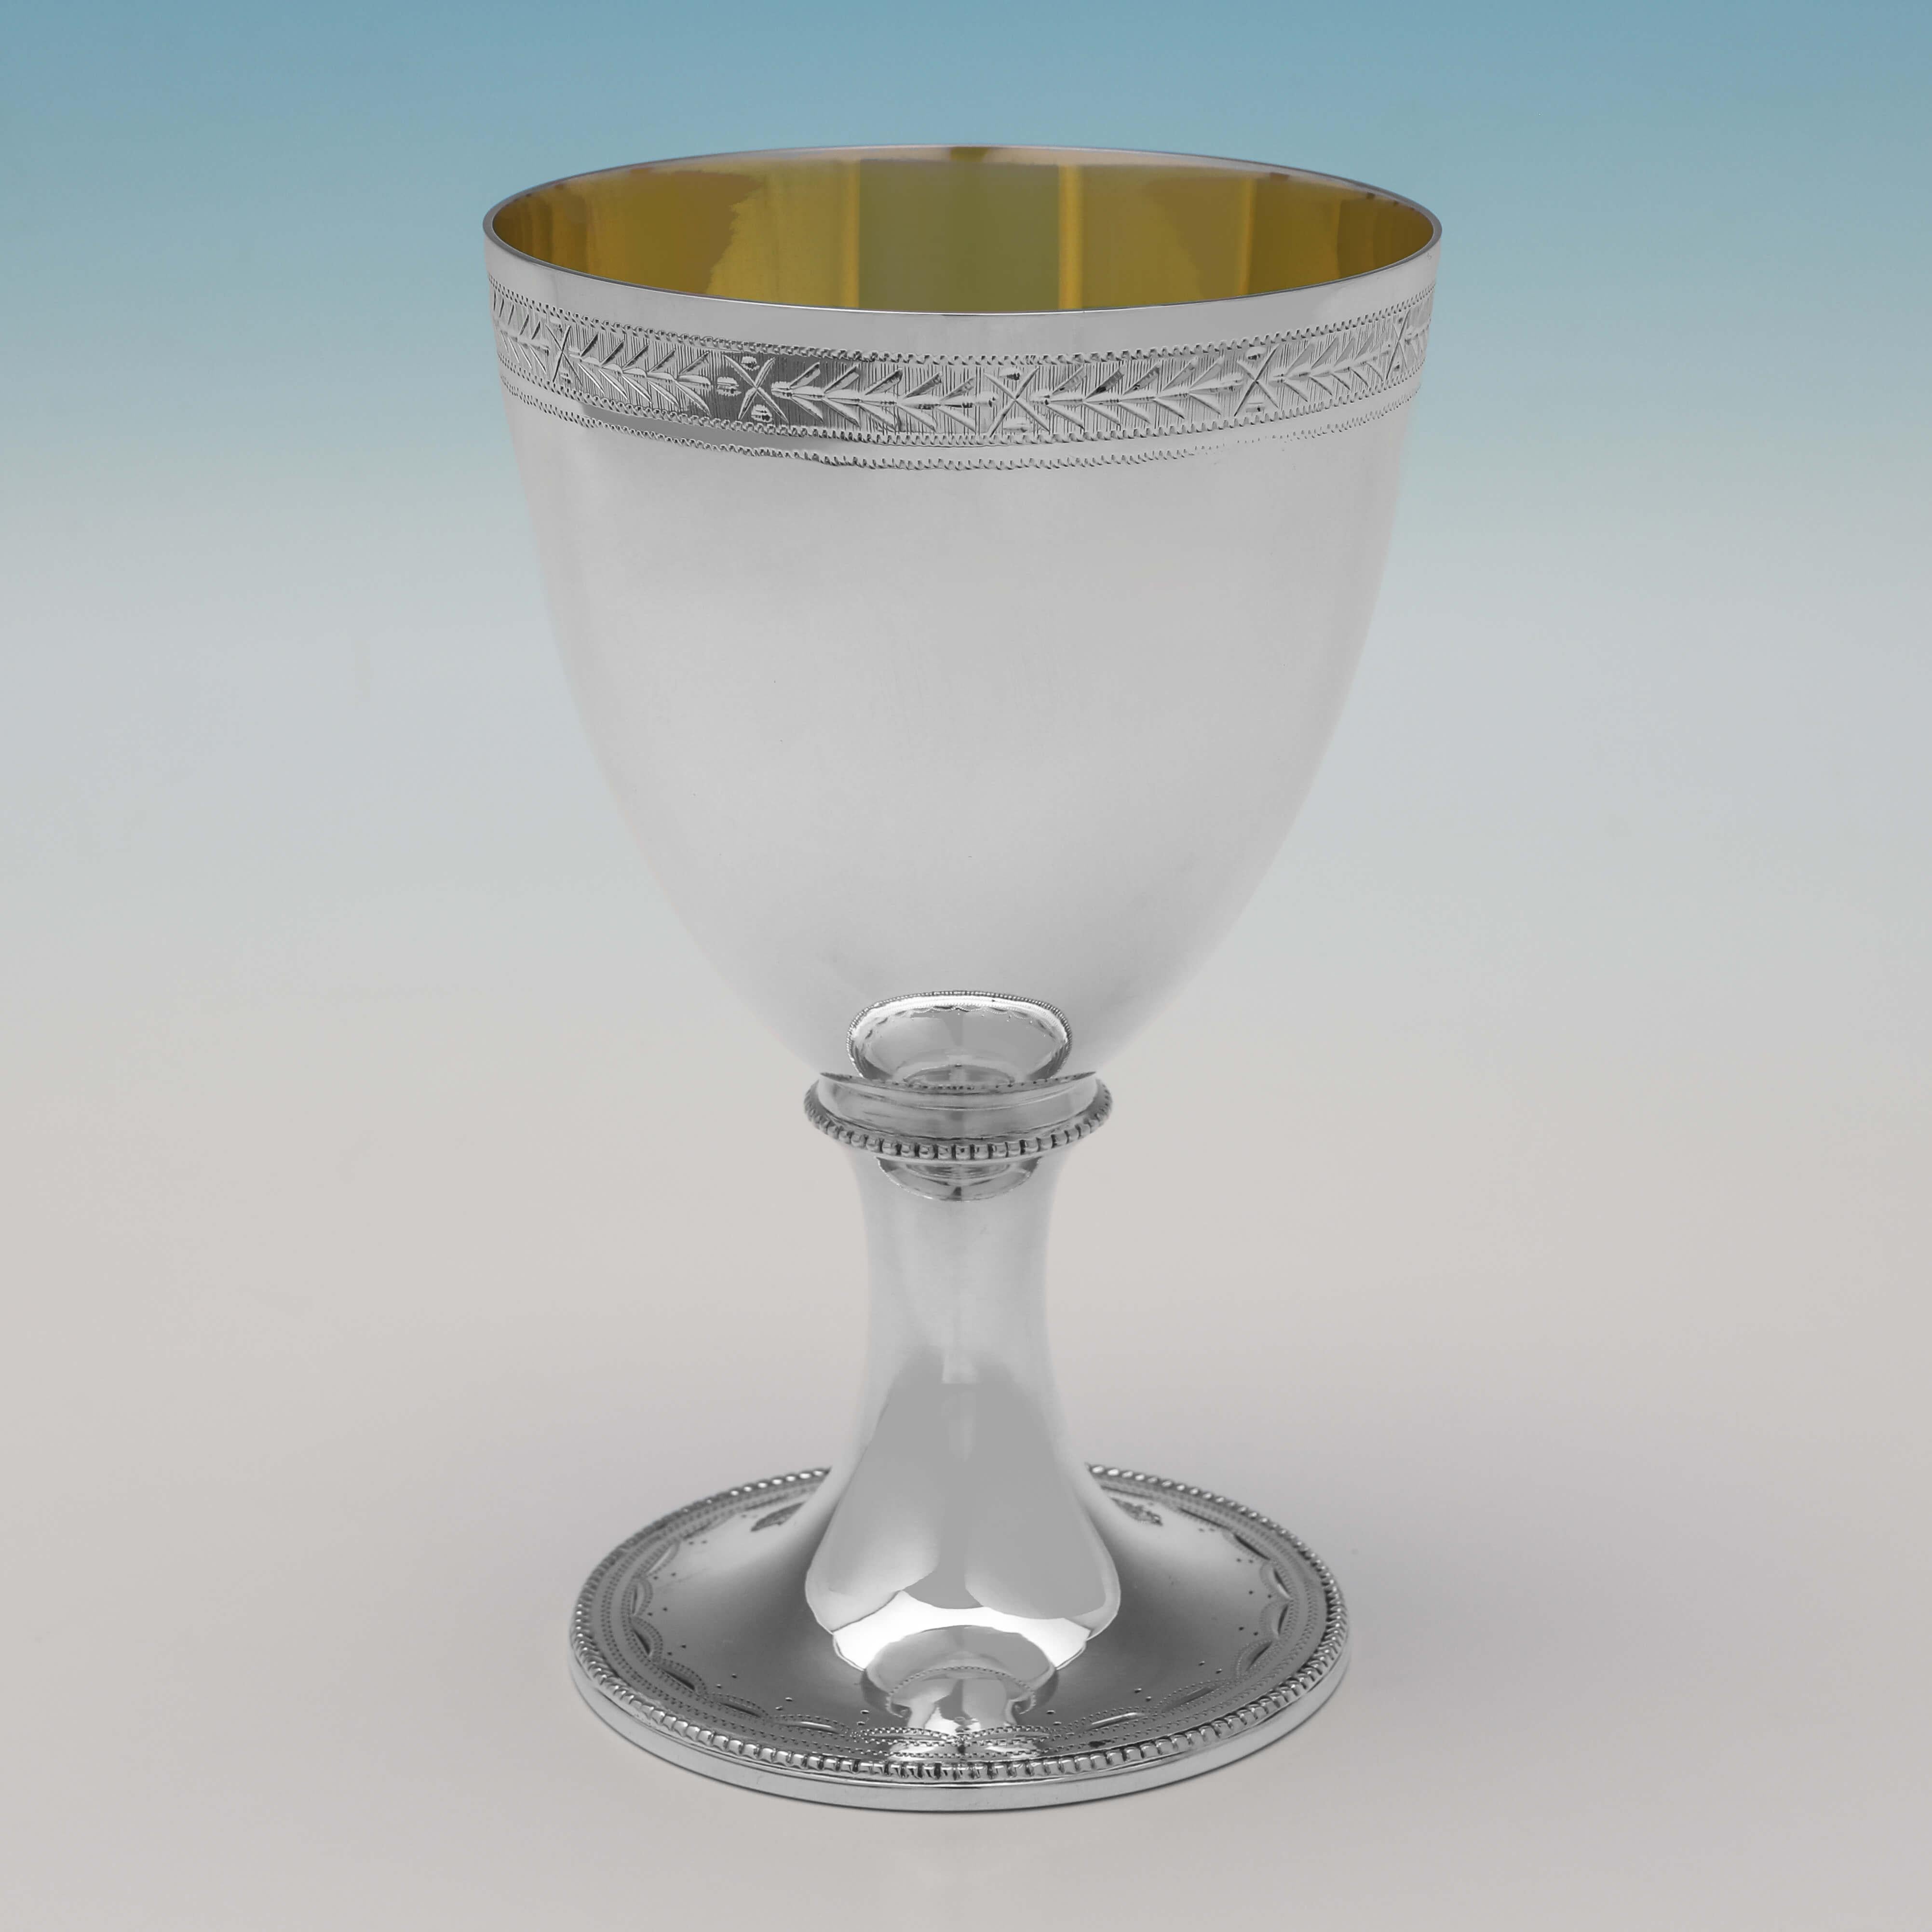 Hallmarked in London in 2000 by C. J. Vander, this handsome set of 6 Sterling Silver Goblets, feature bright cut engraved decoration and gilt interiors. Each goblet measures 5.75